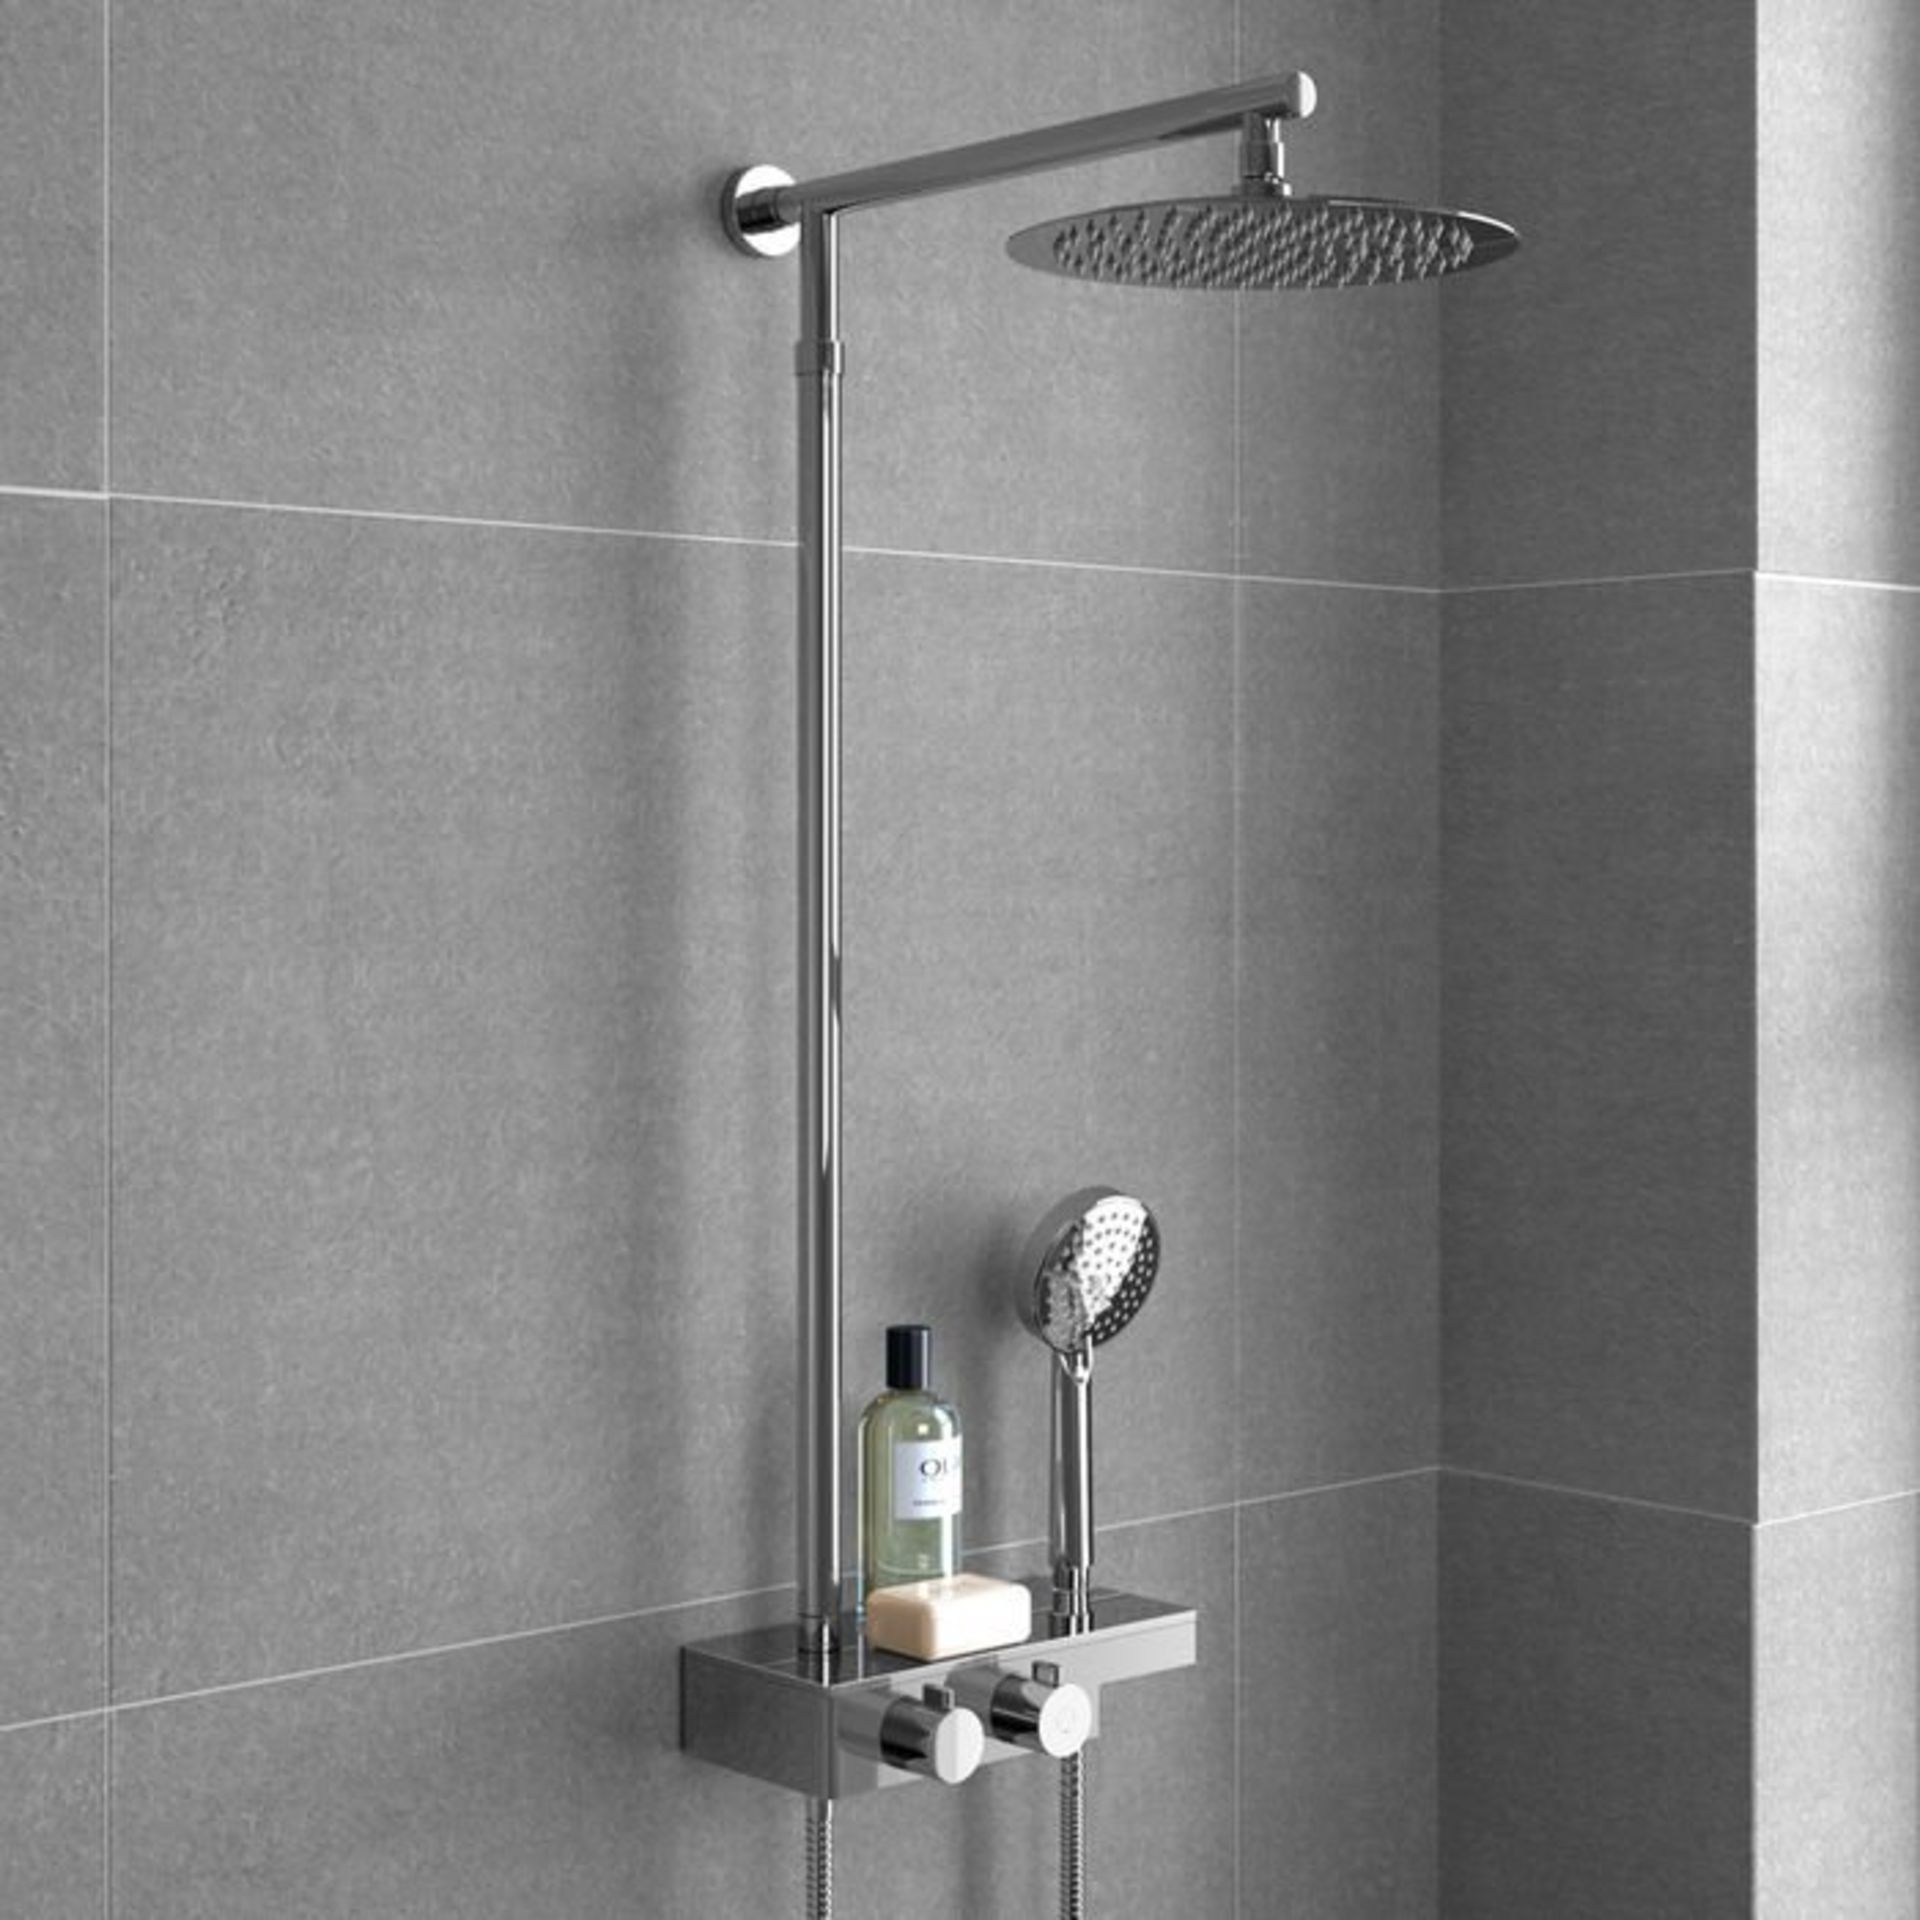 (S41) Round Exposed Thermostatic Mixer Shower Kit & Large Head. Cool to touch shower for - Image 2 of 6